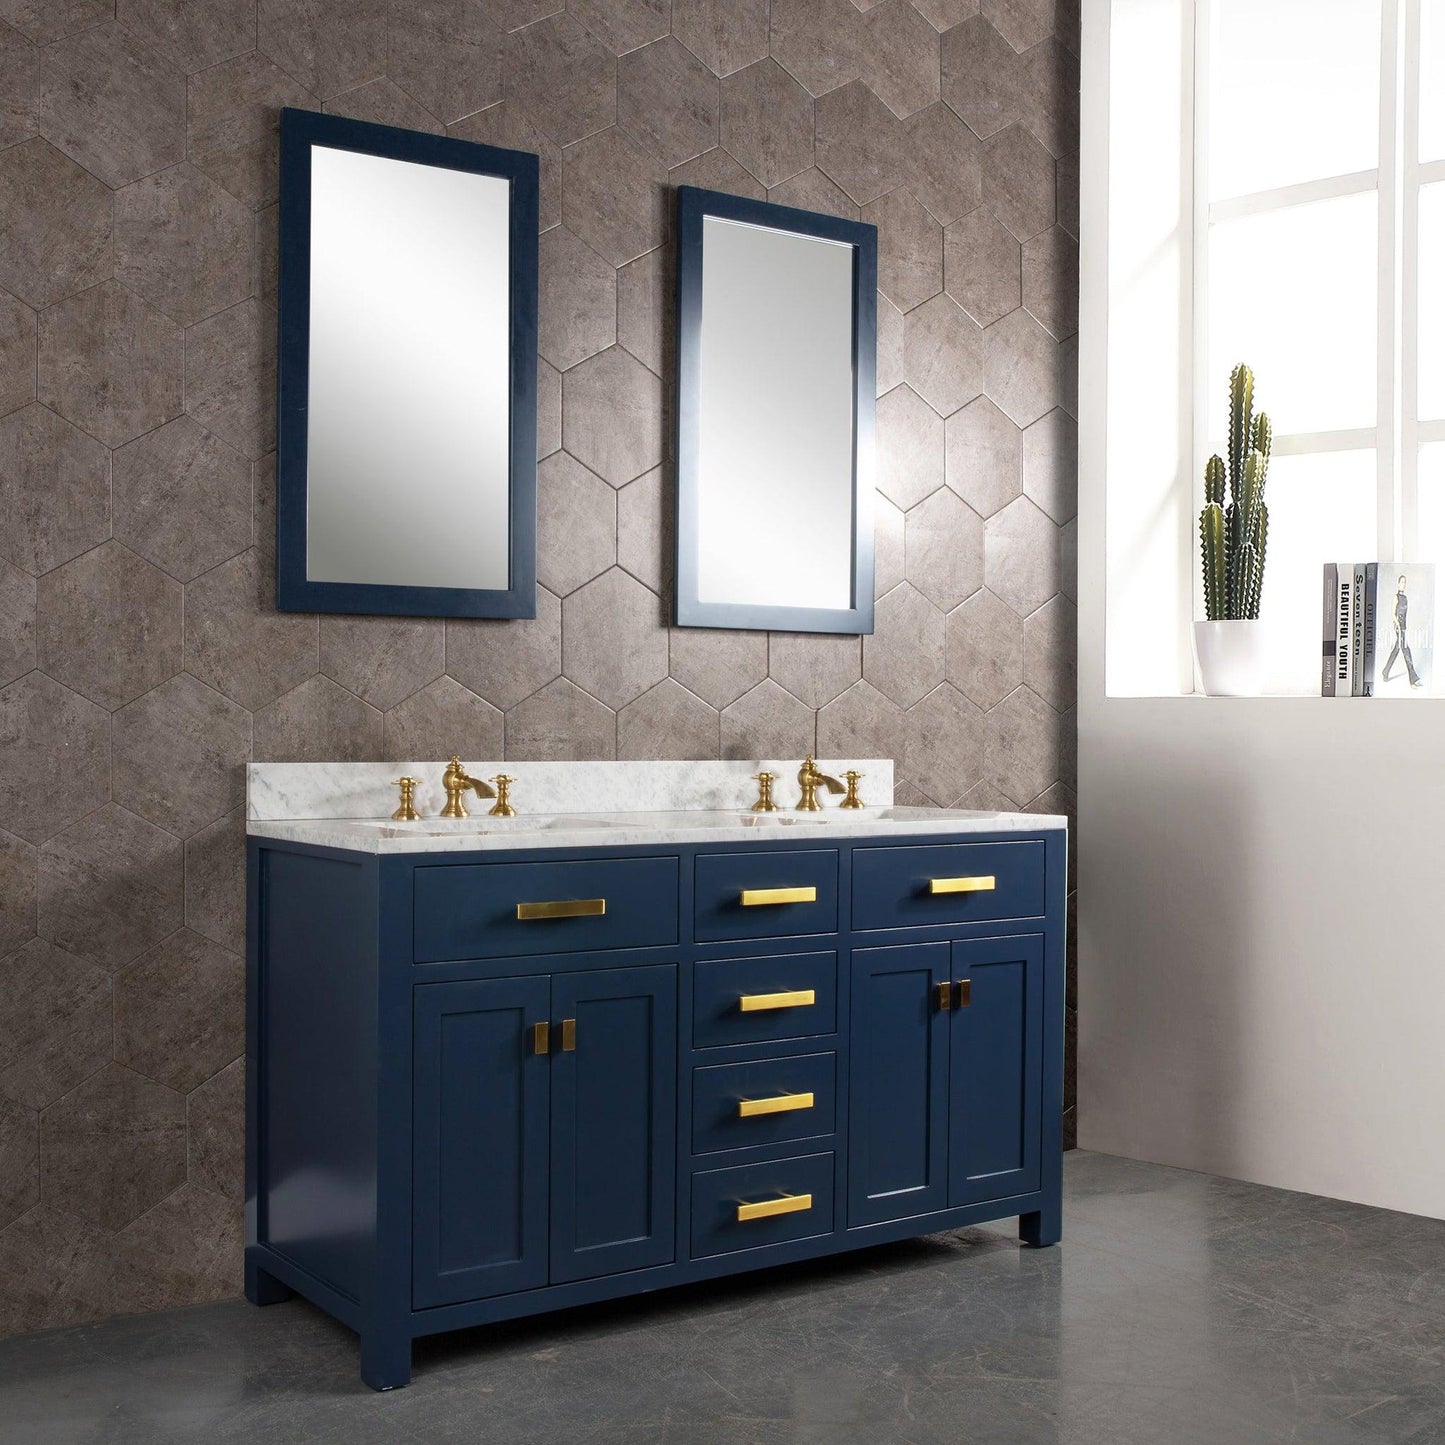 Water Creation Madison 60" Double Sink Carrara White Marble Vanity In Monarch BlueWith Matching Mirror(s)